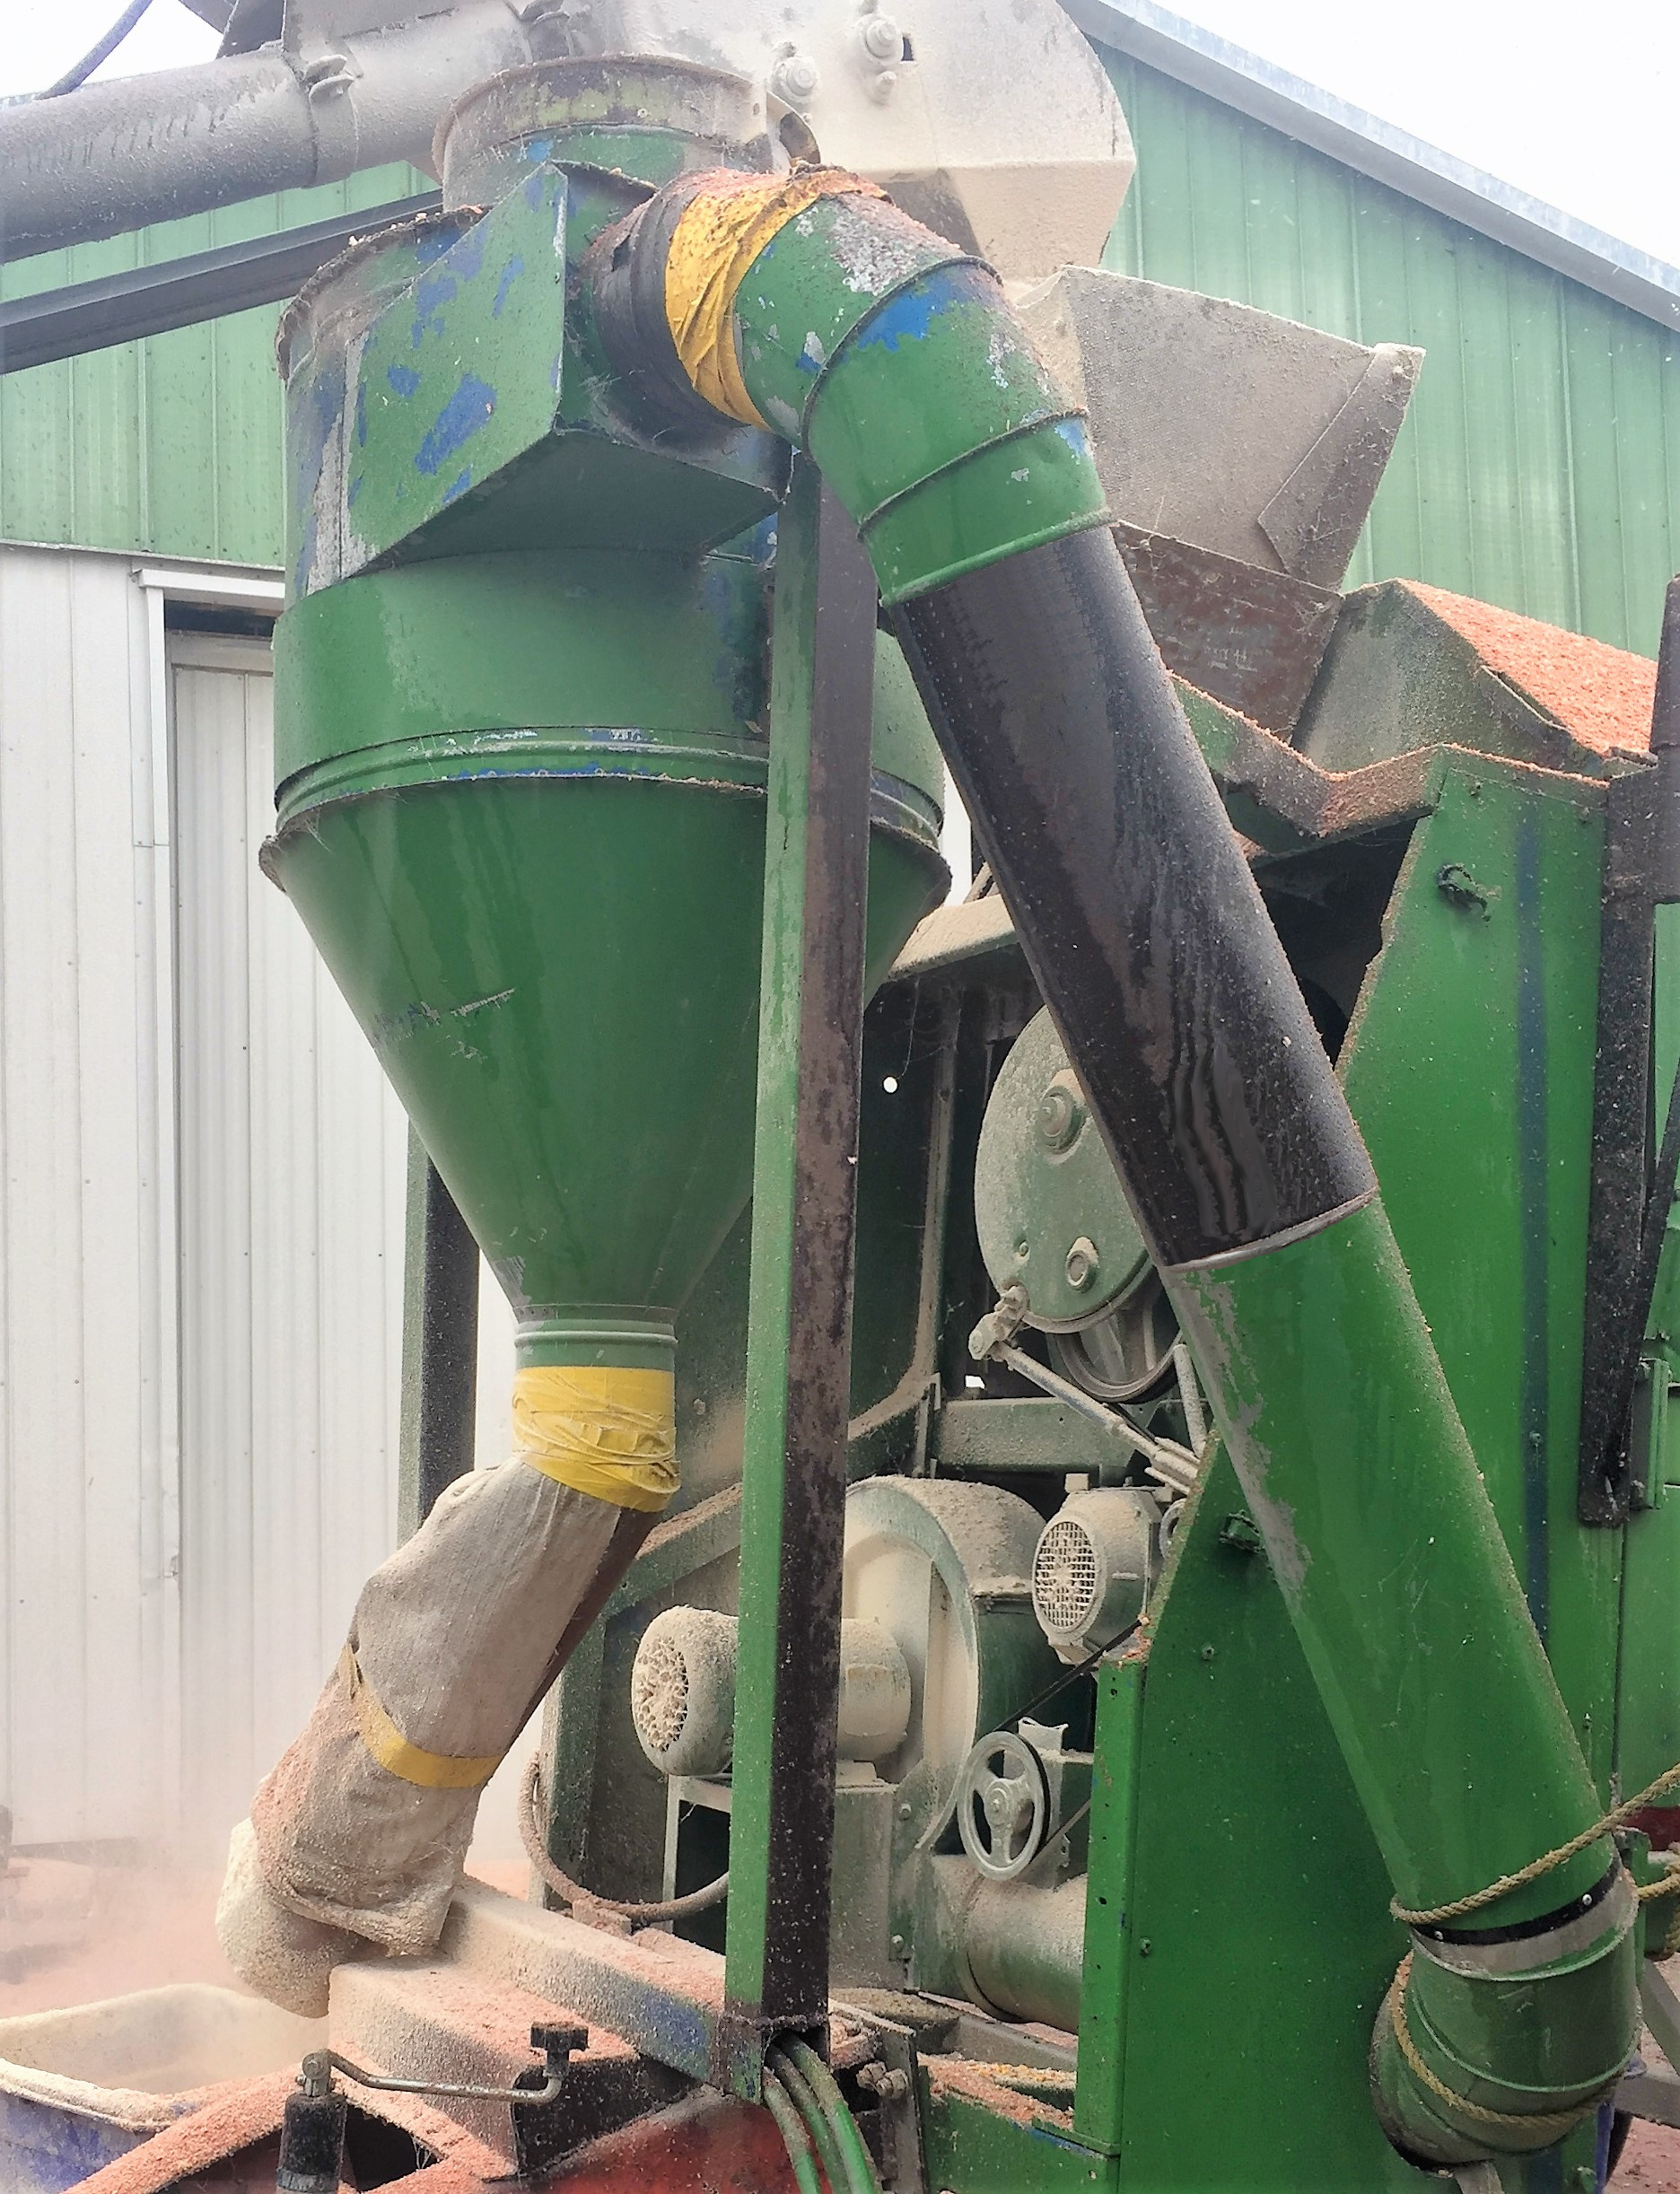 A cyclone separator, like the unit pictured on a grain cleaner system, uses rotational effects and gravity to remove particulate matter from an air stream